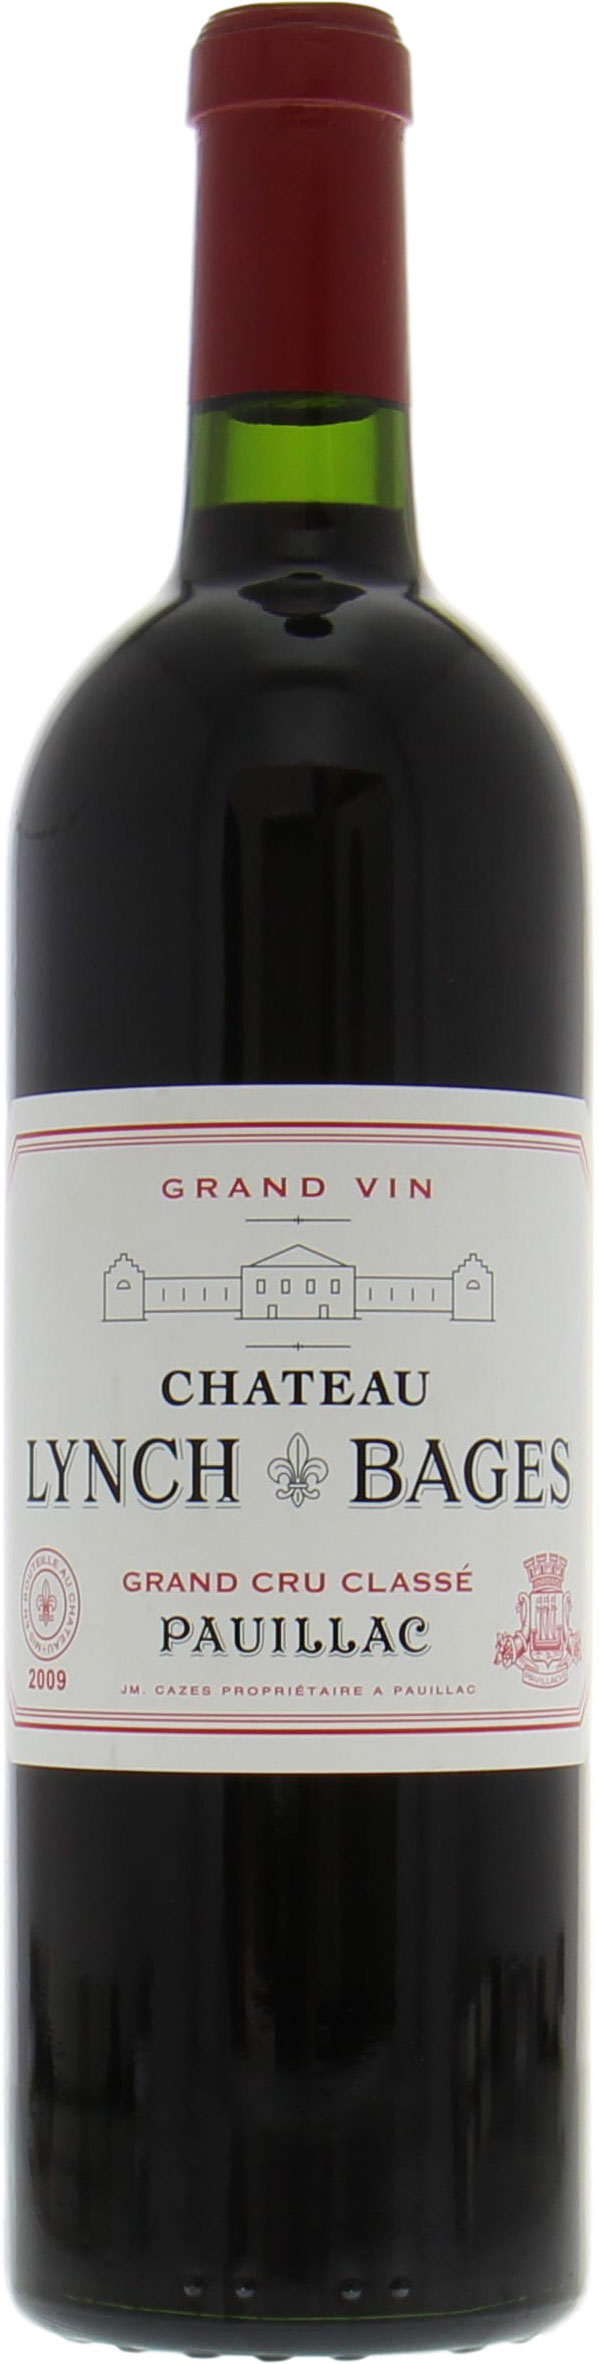 Chateau Lynch Bages - Chateau Lynch Bages 2009